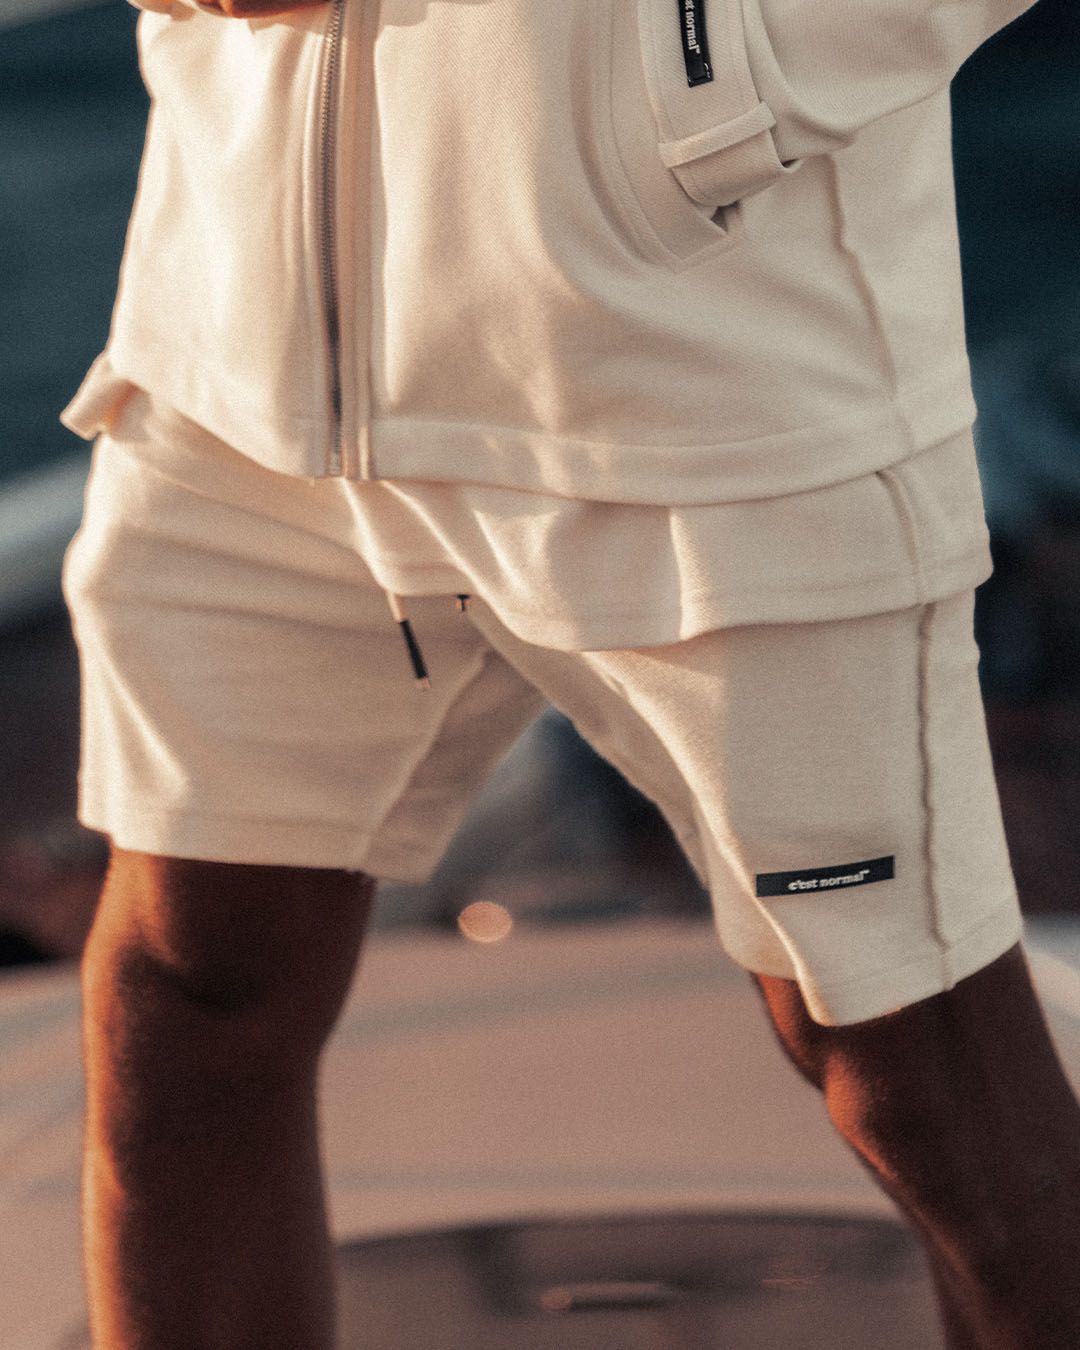 The Inside-Out Shorts